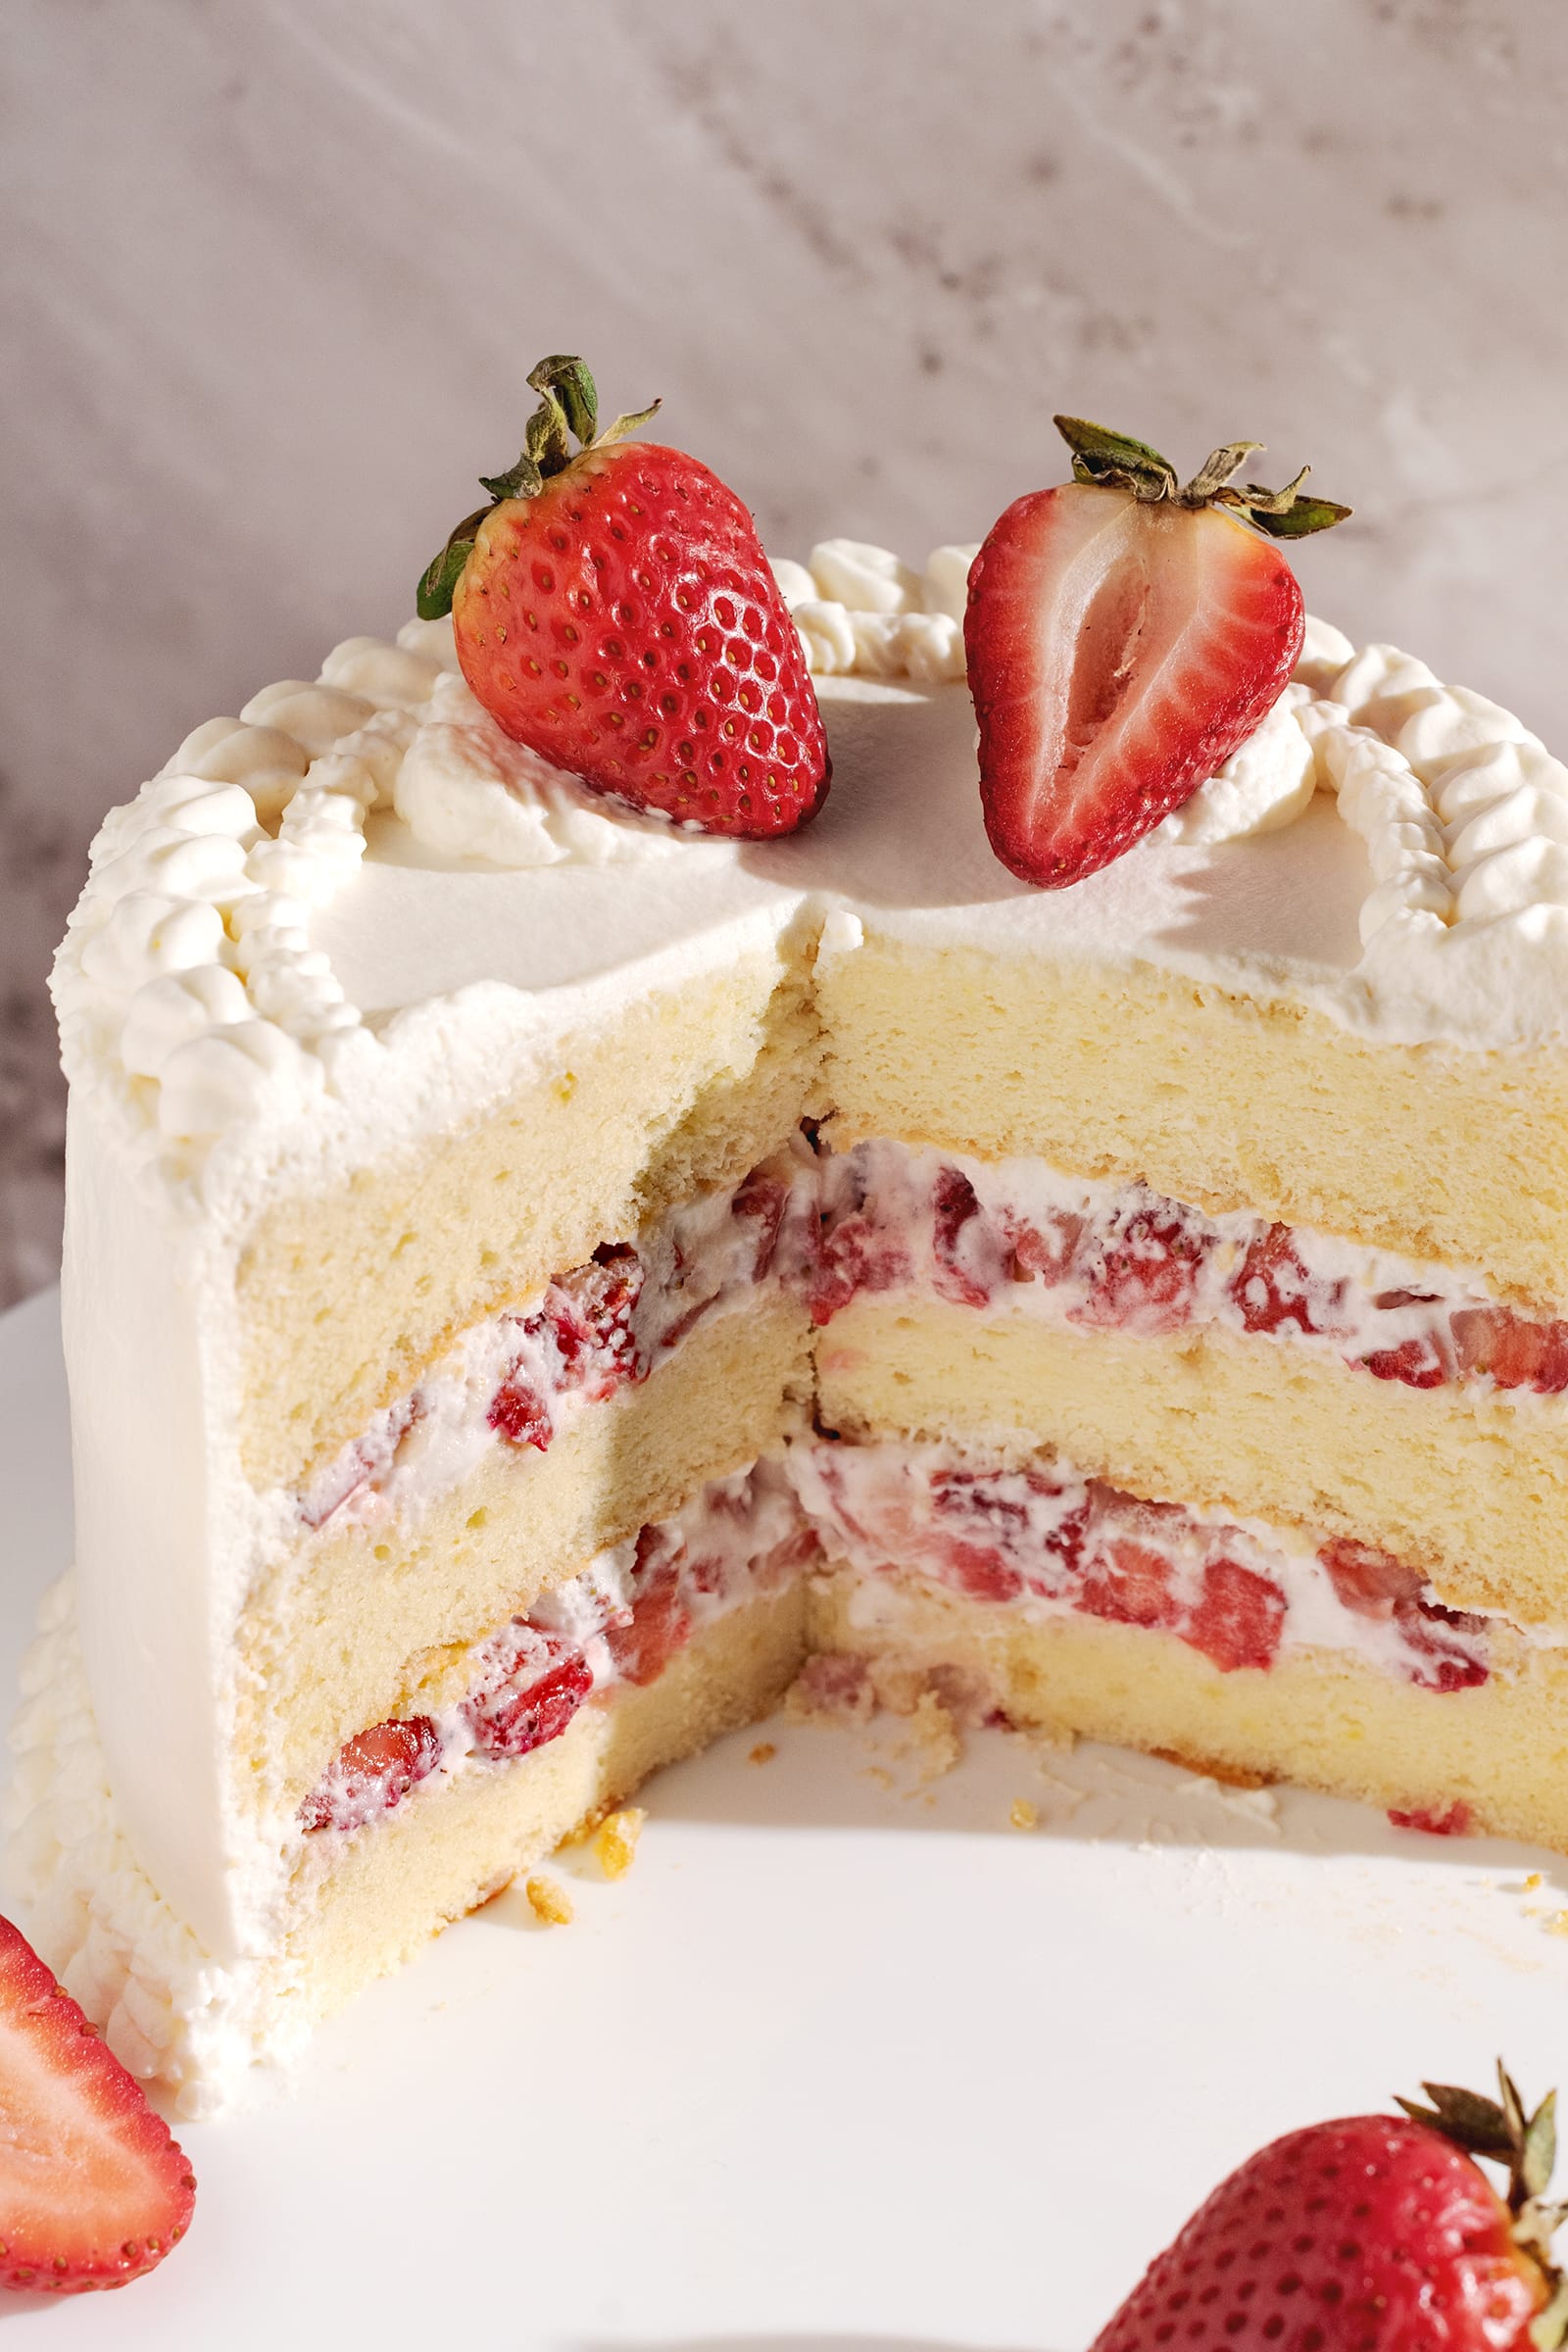 Cross-section of cake showing layers of chiffon cake, whipped cream, and strawberries inside.